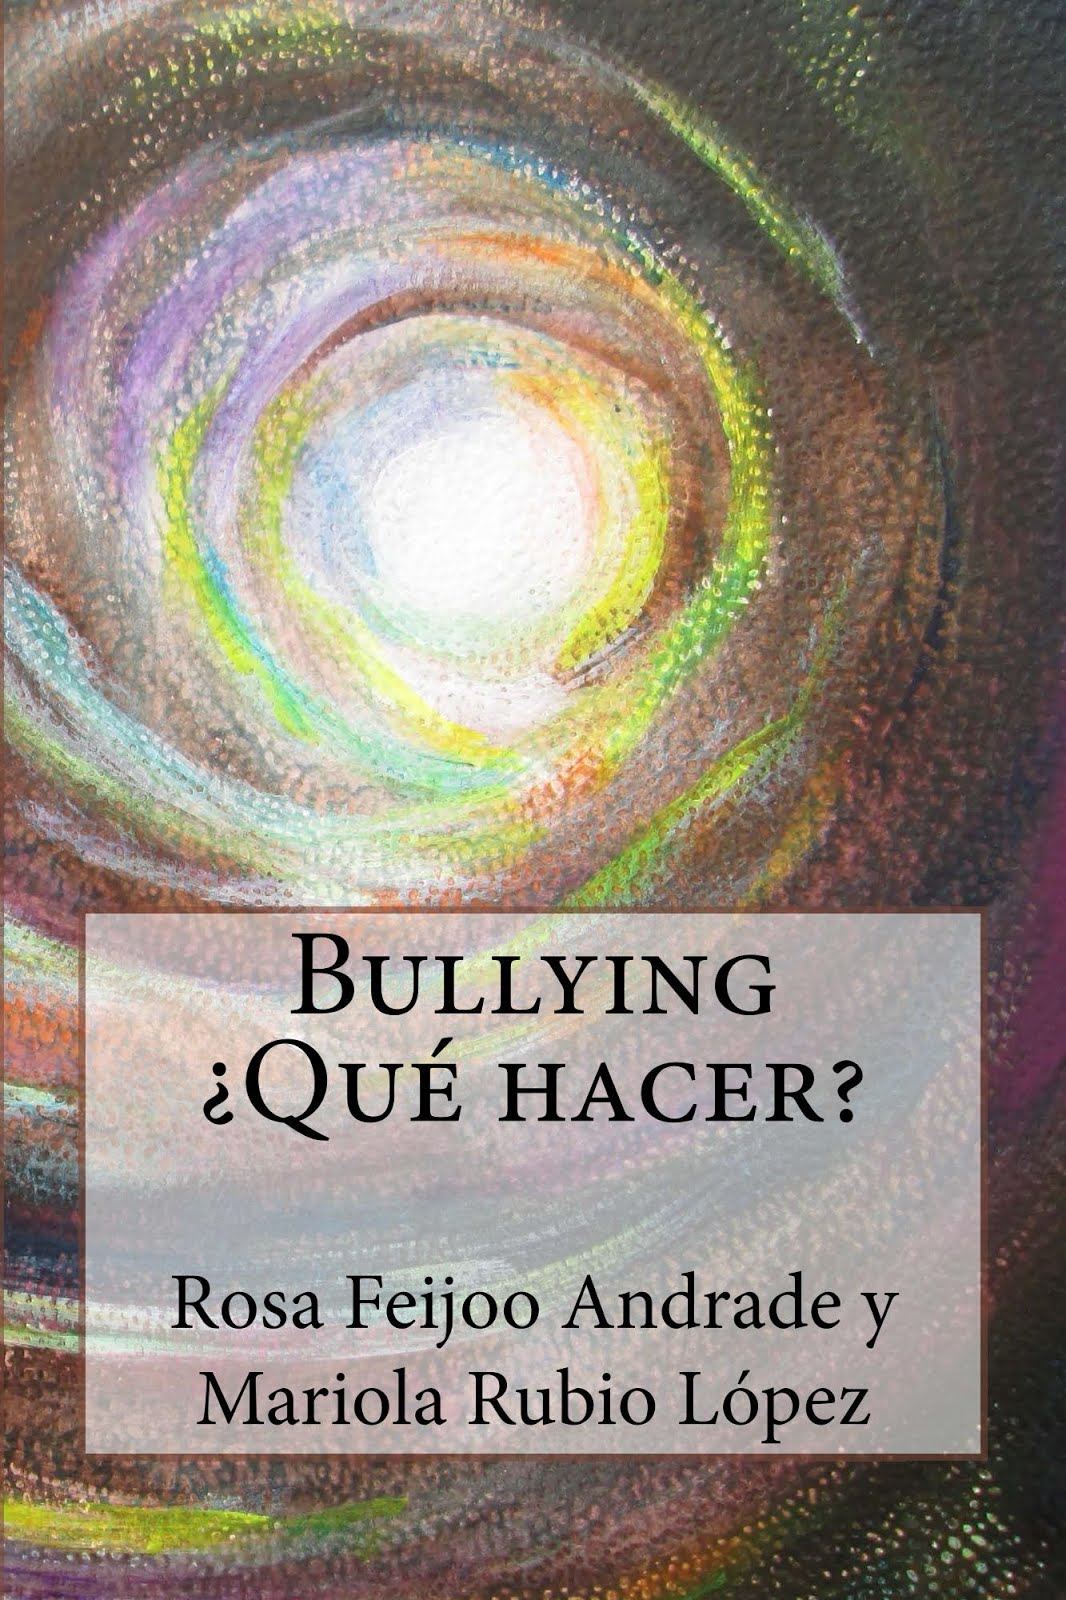 Bullying ¿Qué hacer?